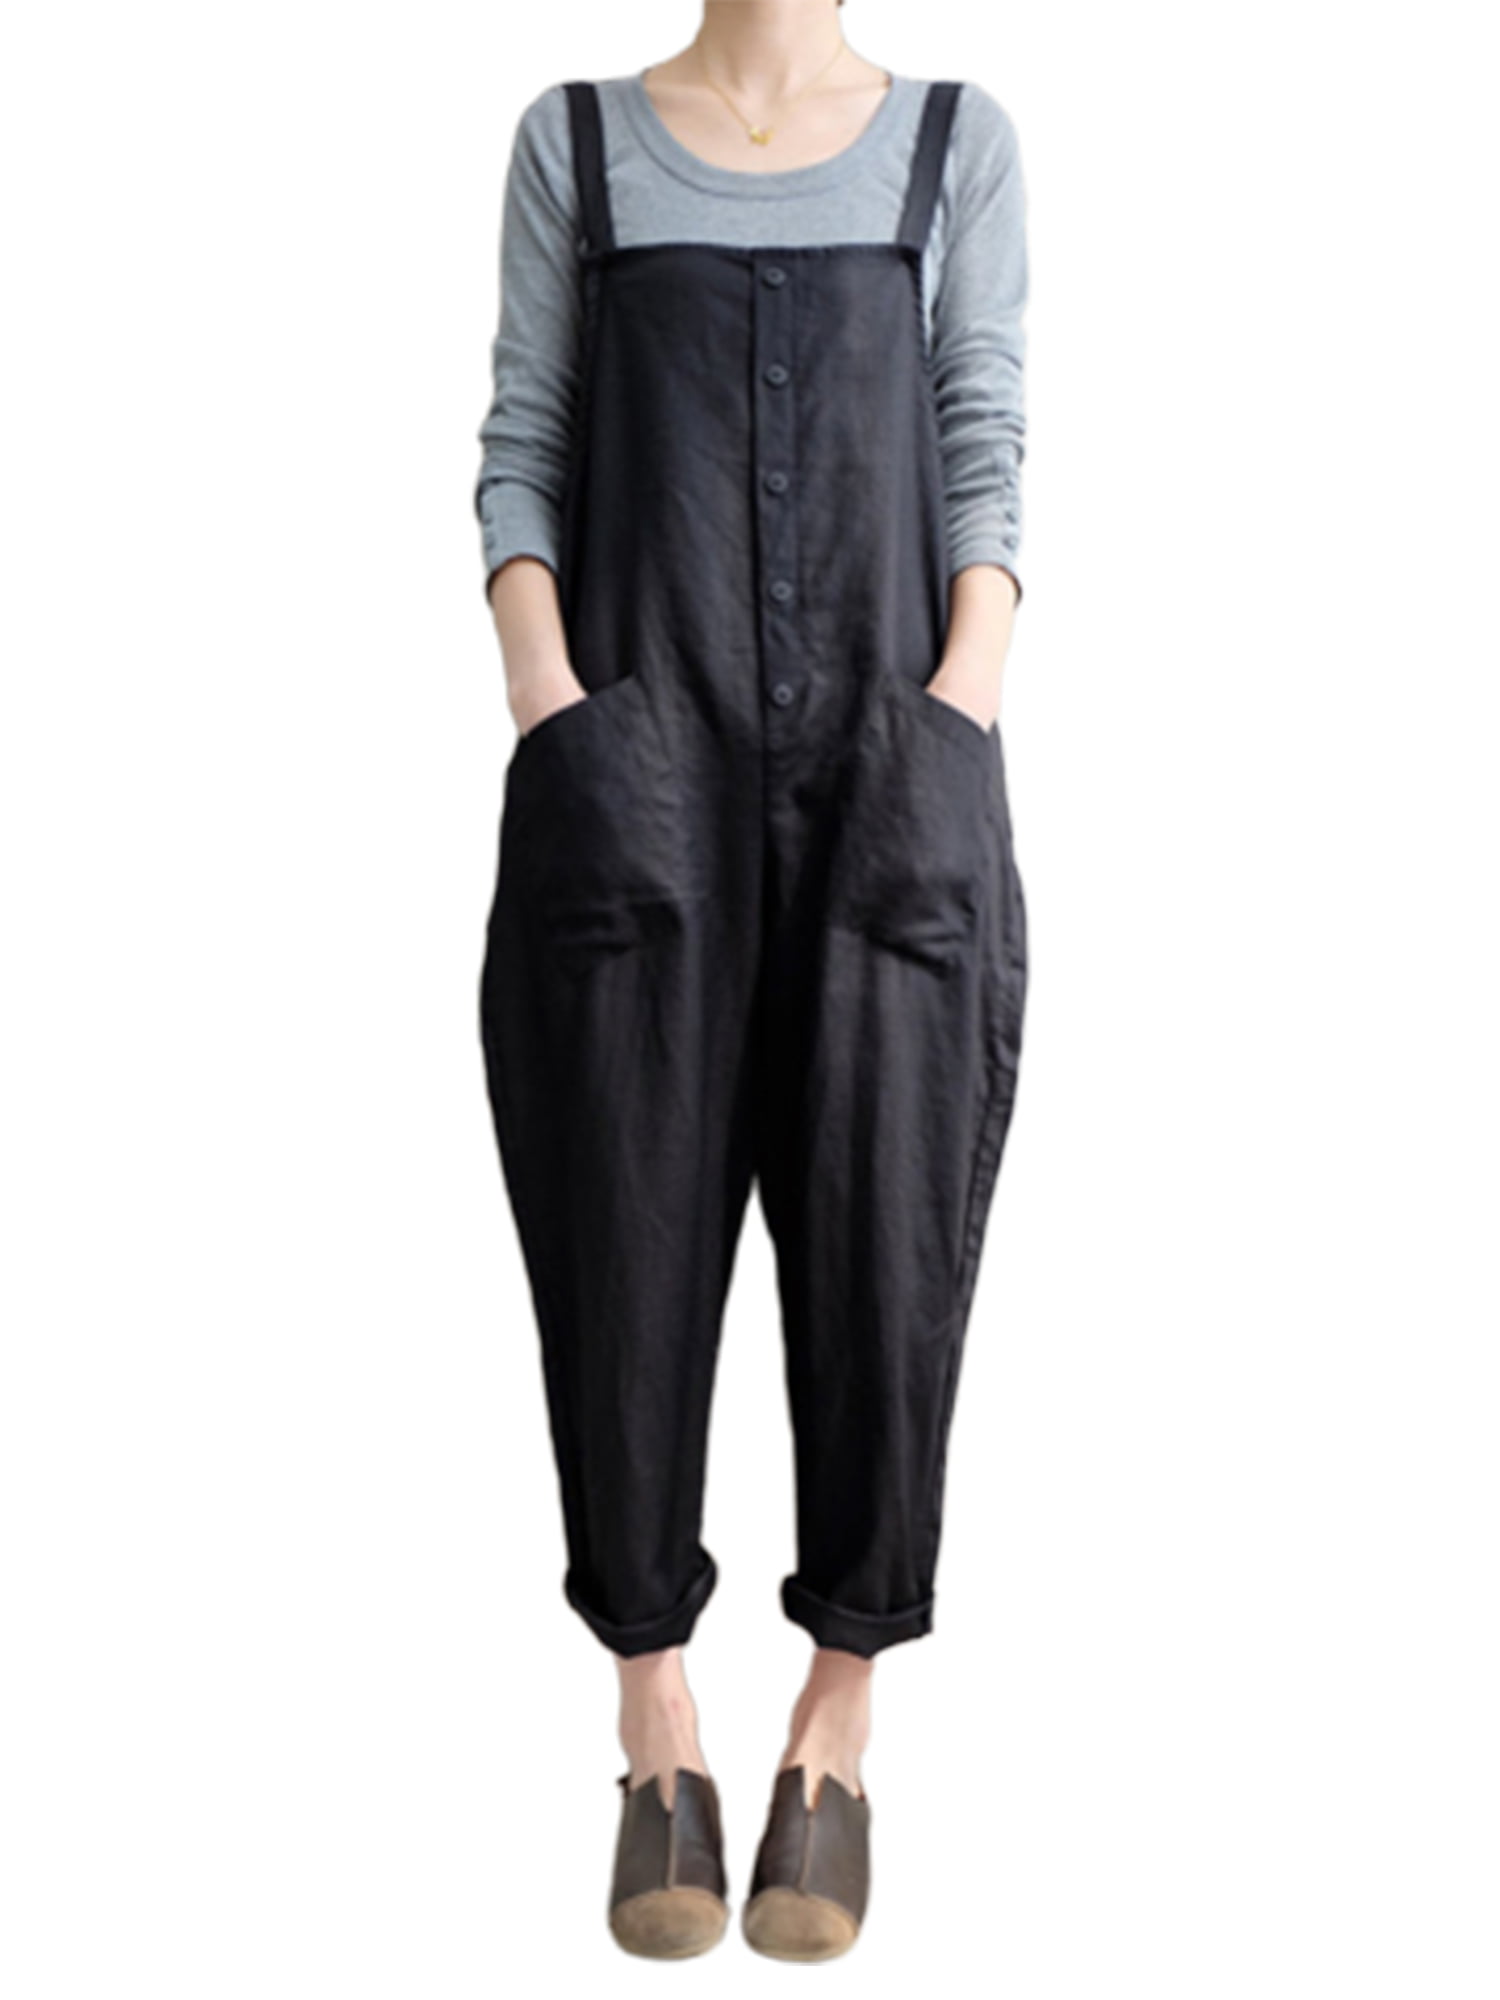 Gray Knit Jumpsuit with Harem Pants -Wide Leg Pants-One Piece Sexy Harem  Jumpsuit-The Savvy Runway – The Savvy Runway